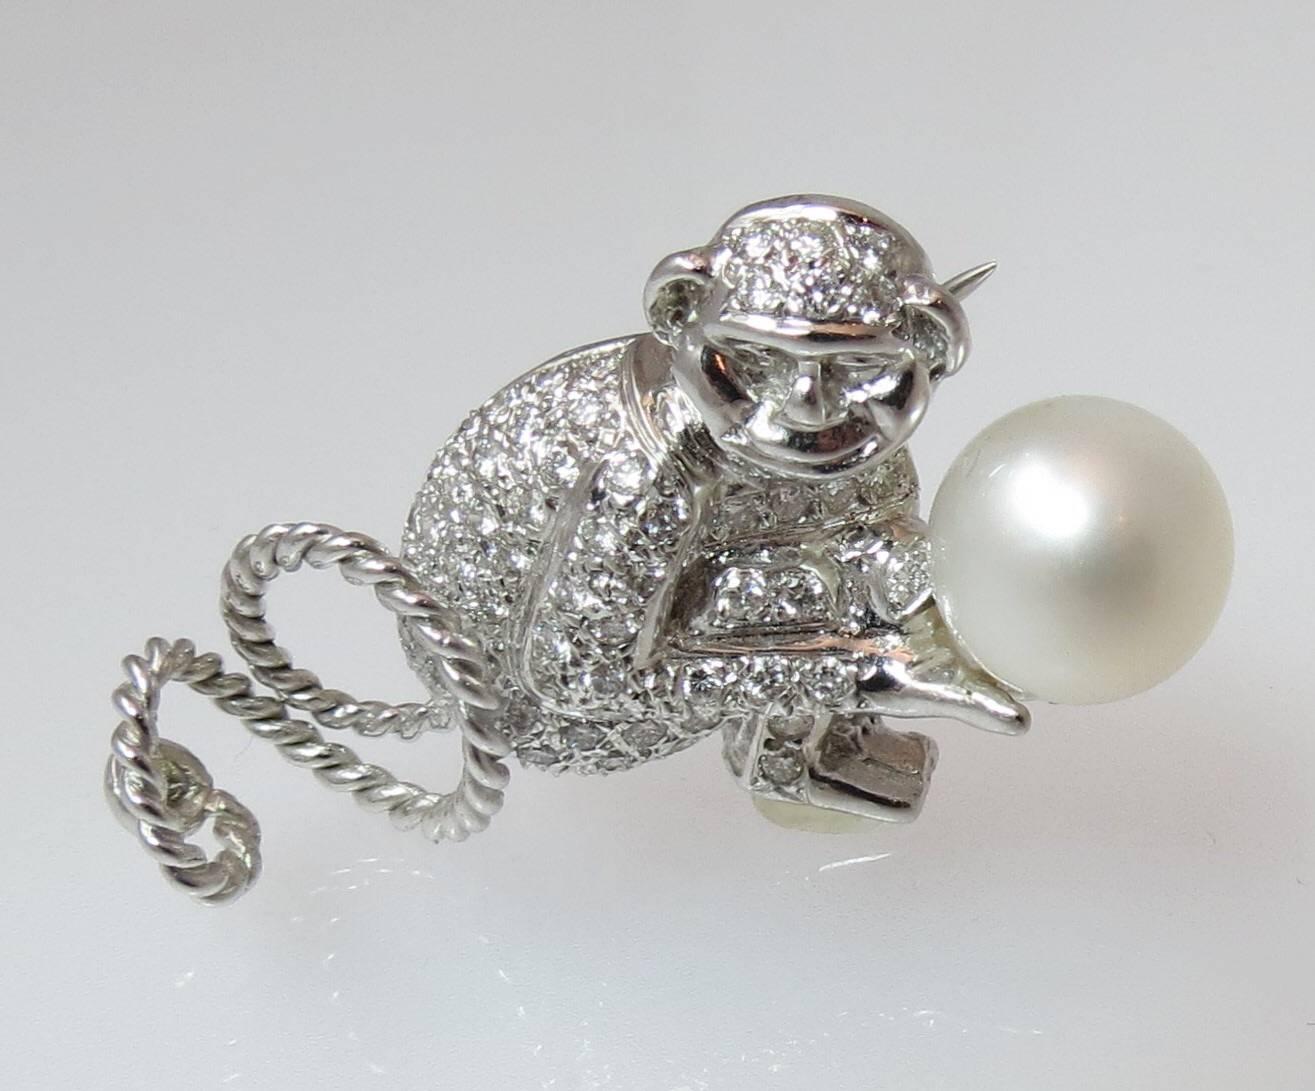 Adorable 18K white gold diamond and South Sea pearl monkey pin, set with 78 full cut round diamonds weighing approximately 1.17cts and one South Sea 9.8mm.